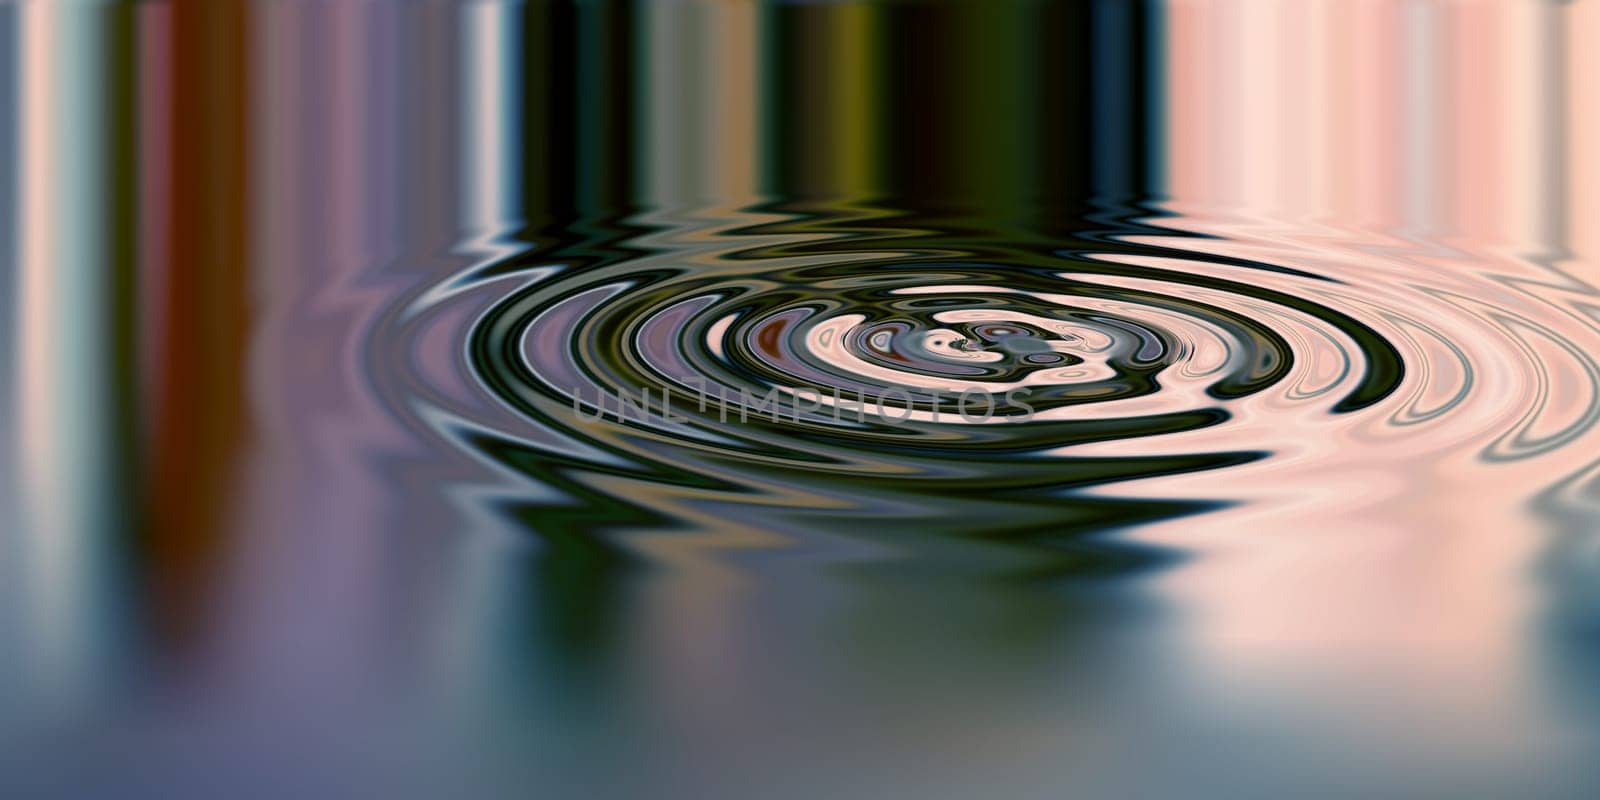 Waves, ripple and design with water drop pattern with mockup for 3d, digital and texture. Environment, reflection and futuristic with liquid in background for abstract, sustainability and art deco.